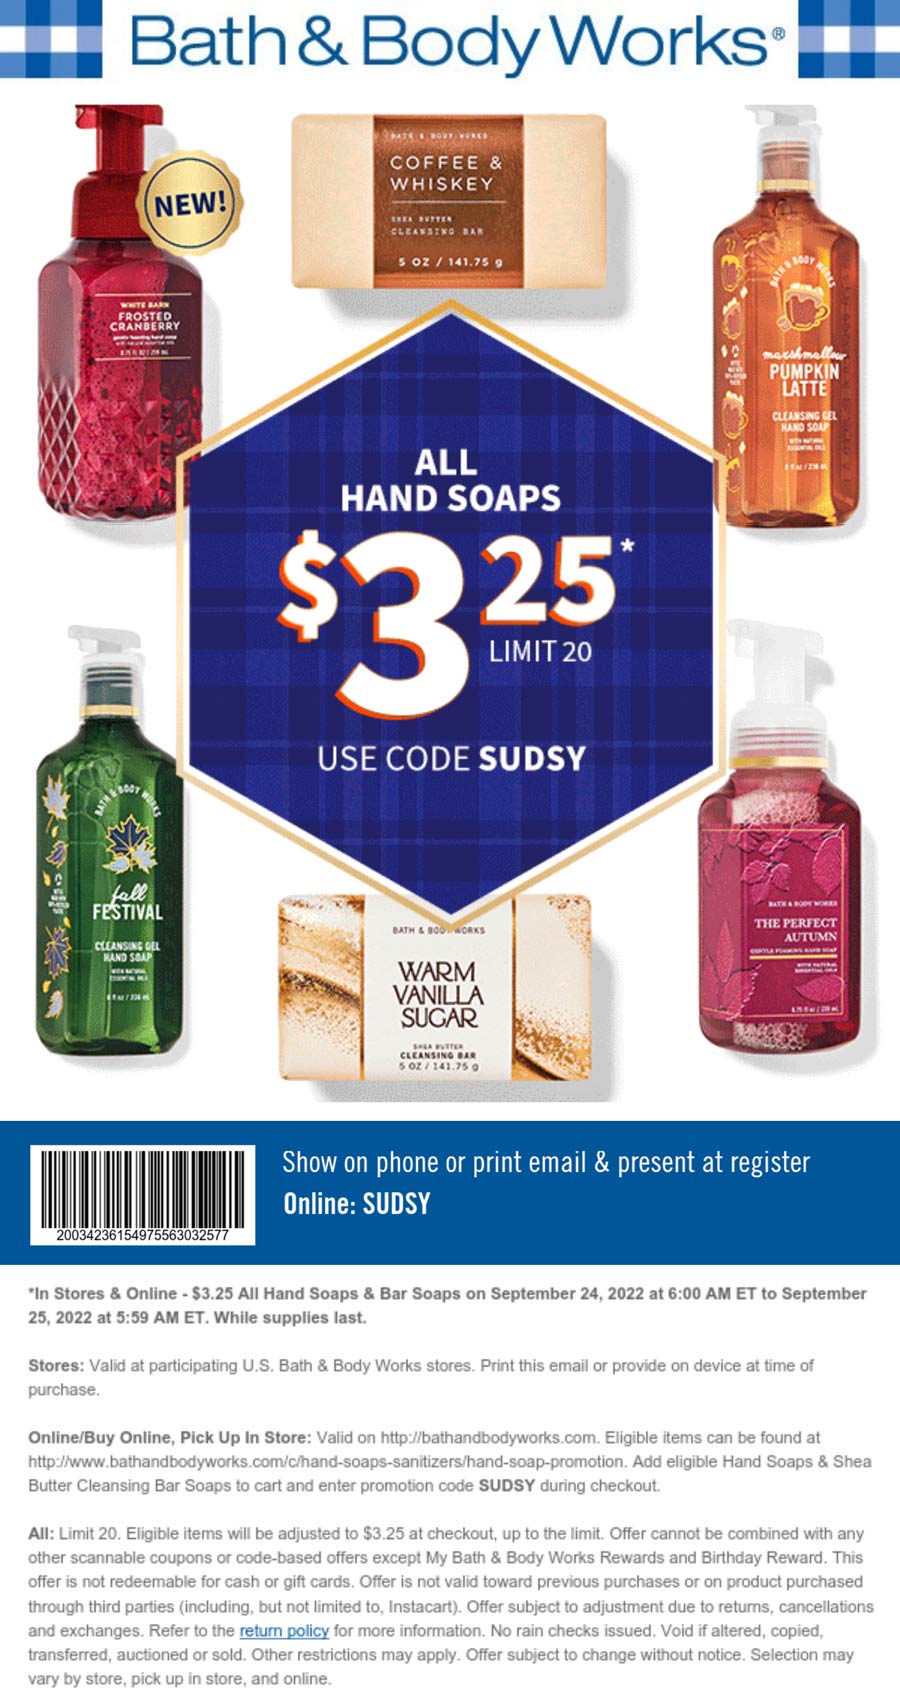 Bath & Body Works restaurants Coupon  All hand soaps & bar soaps $3.25 today at Bath & Body Works, or online via promo code SUDSY #bathbodyworks 